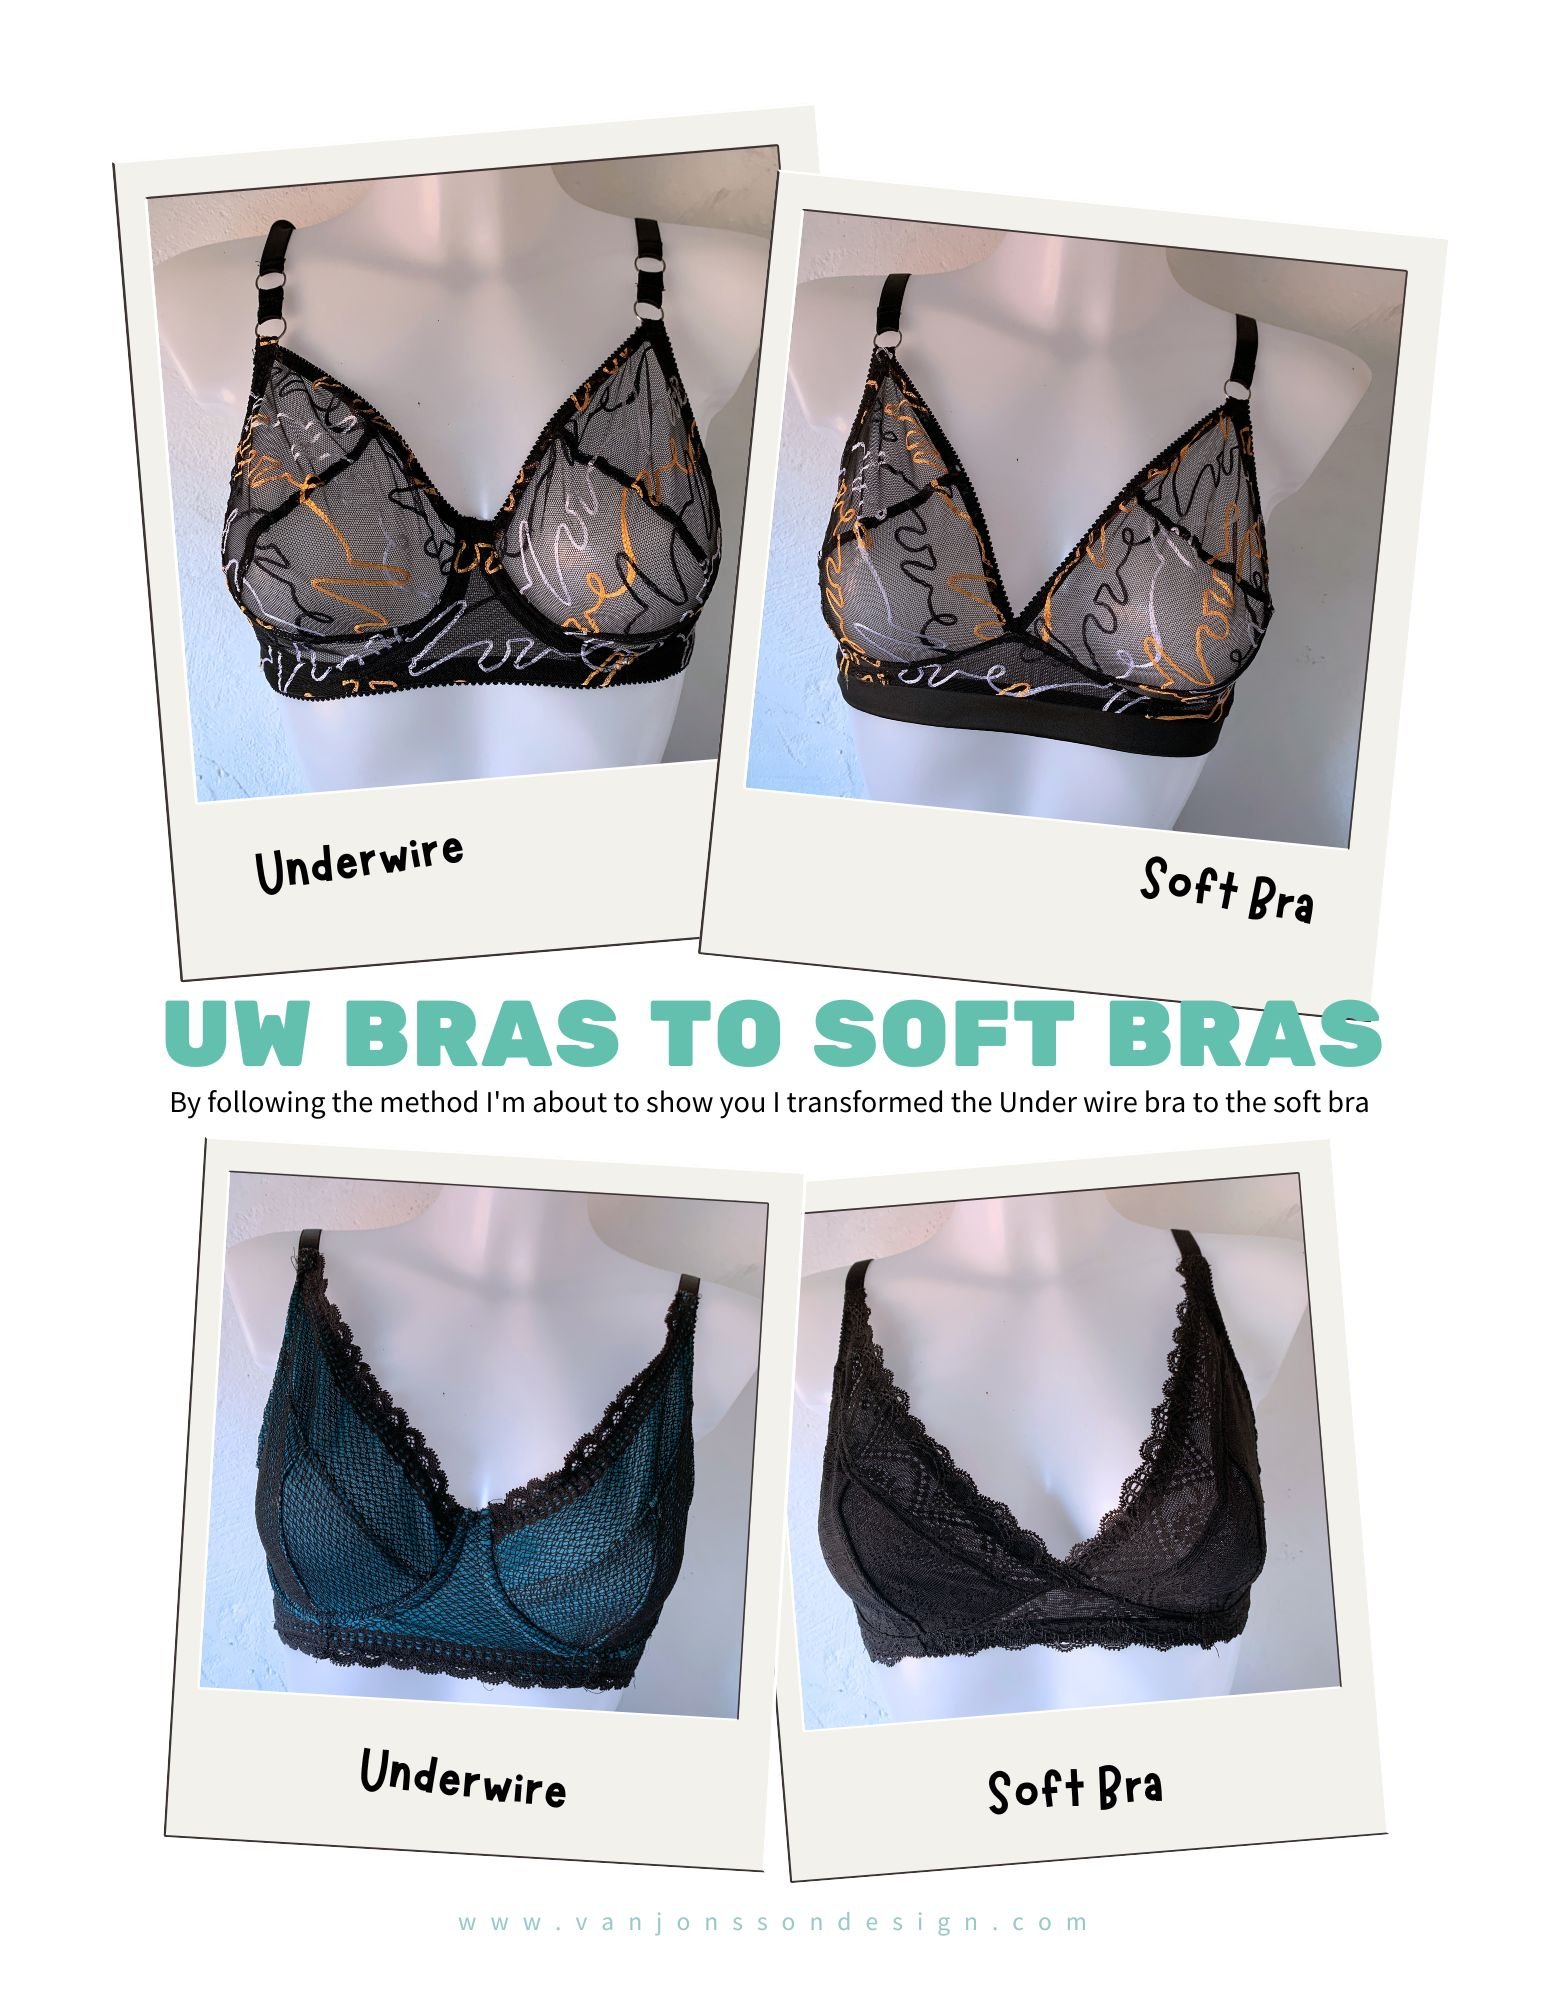 How to change an underwire bra to a soft bra: Lingeri-e-course